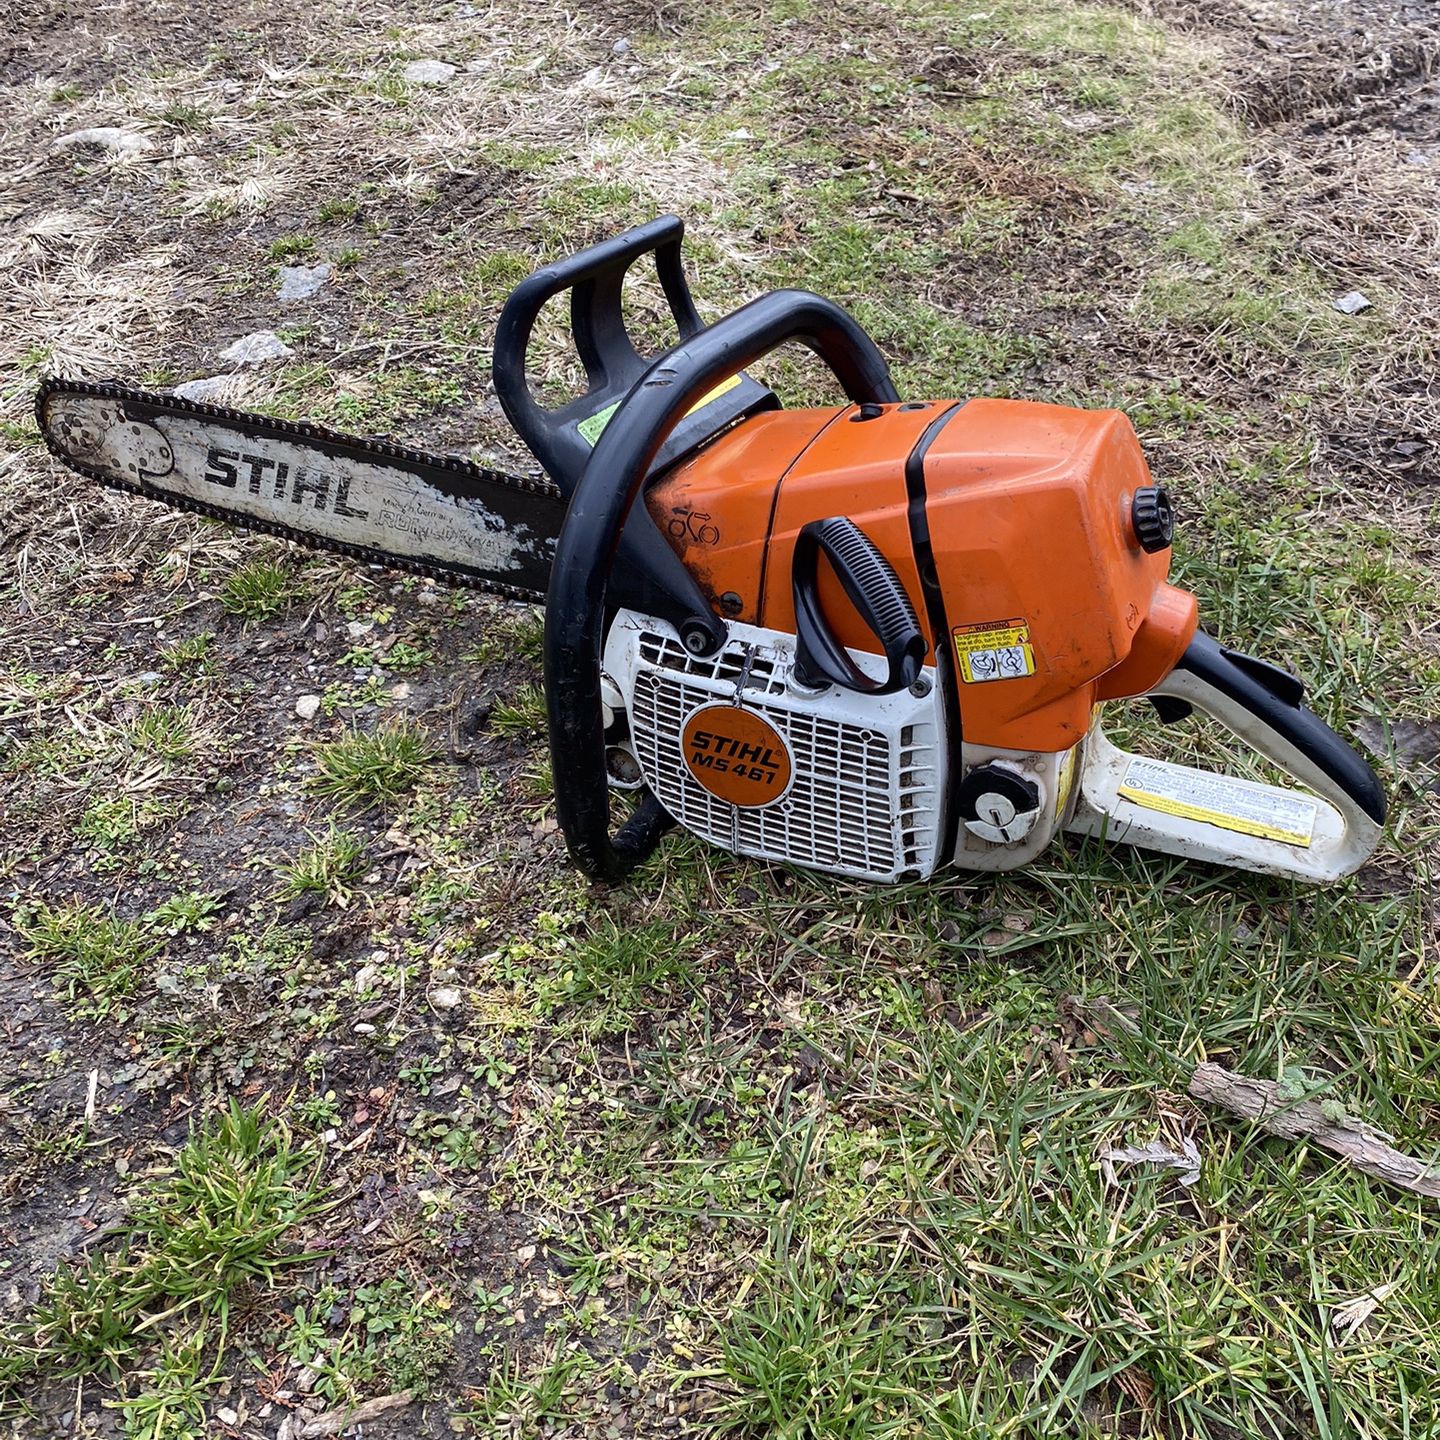 Stihl MS 461 Chainsaw for Sale in Norwalk, CT - OfferUp